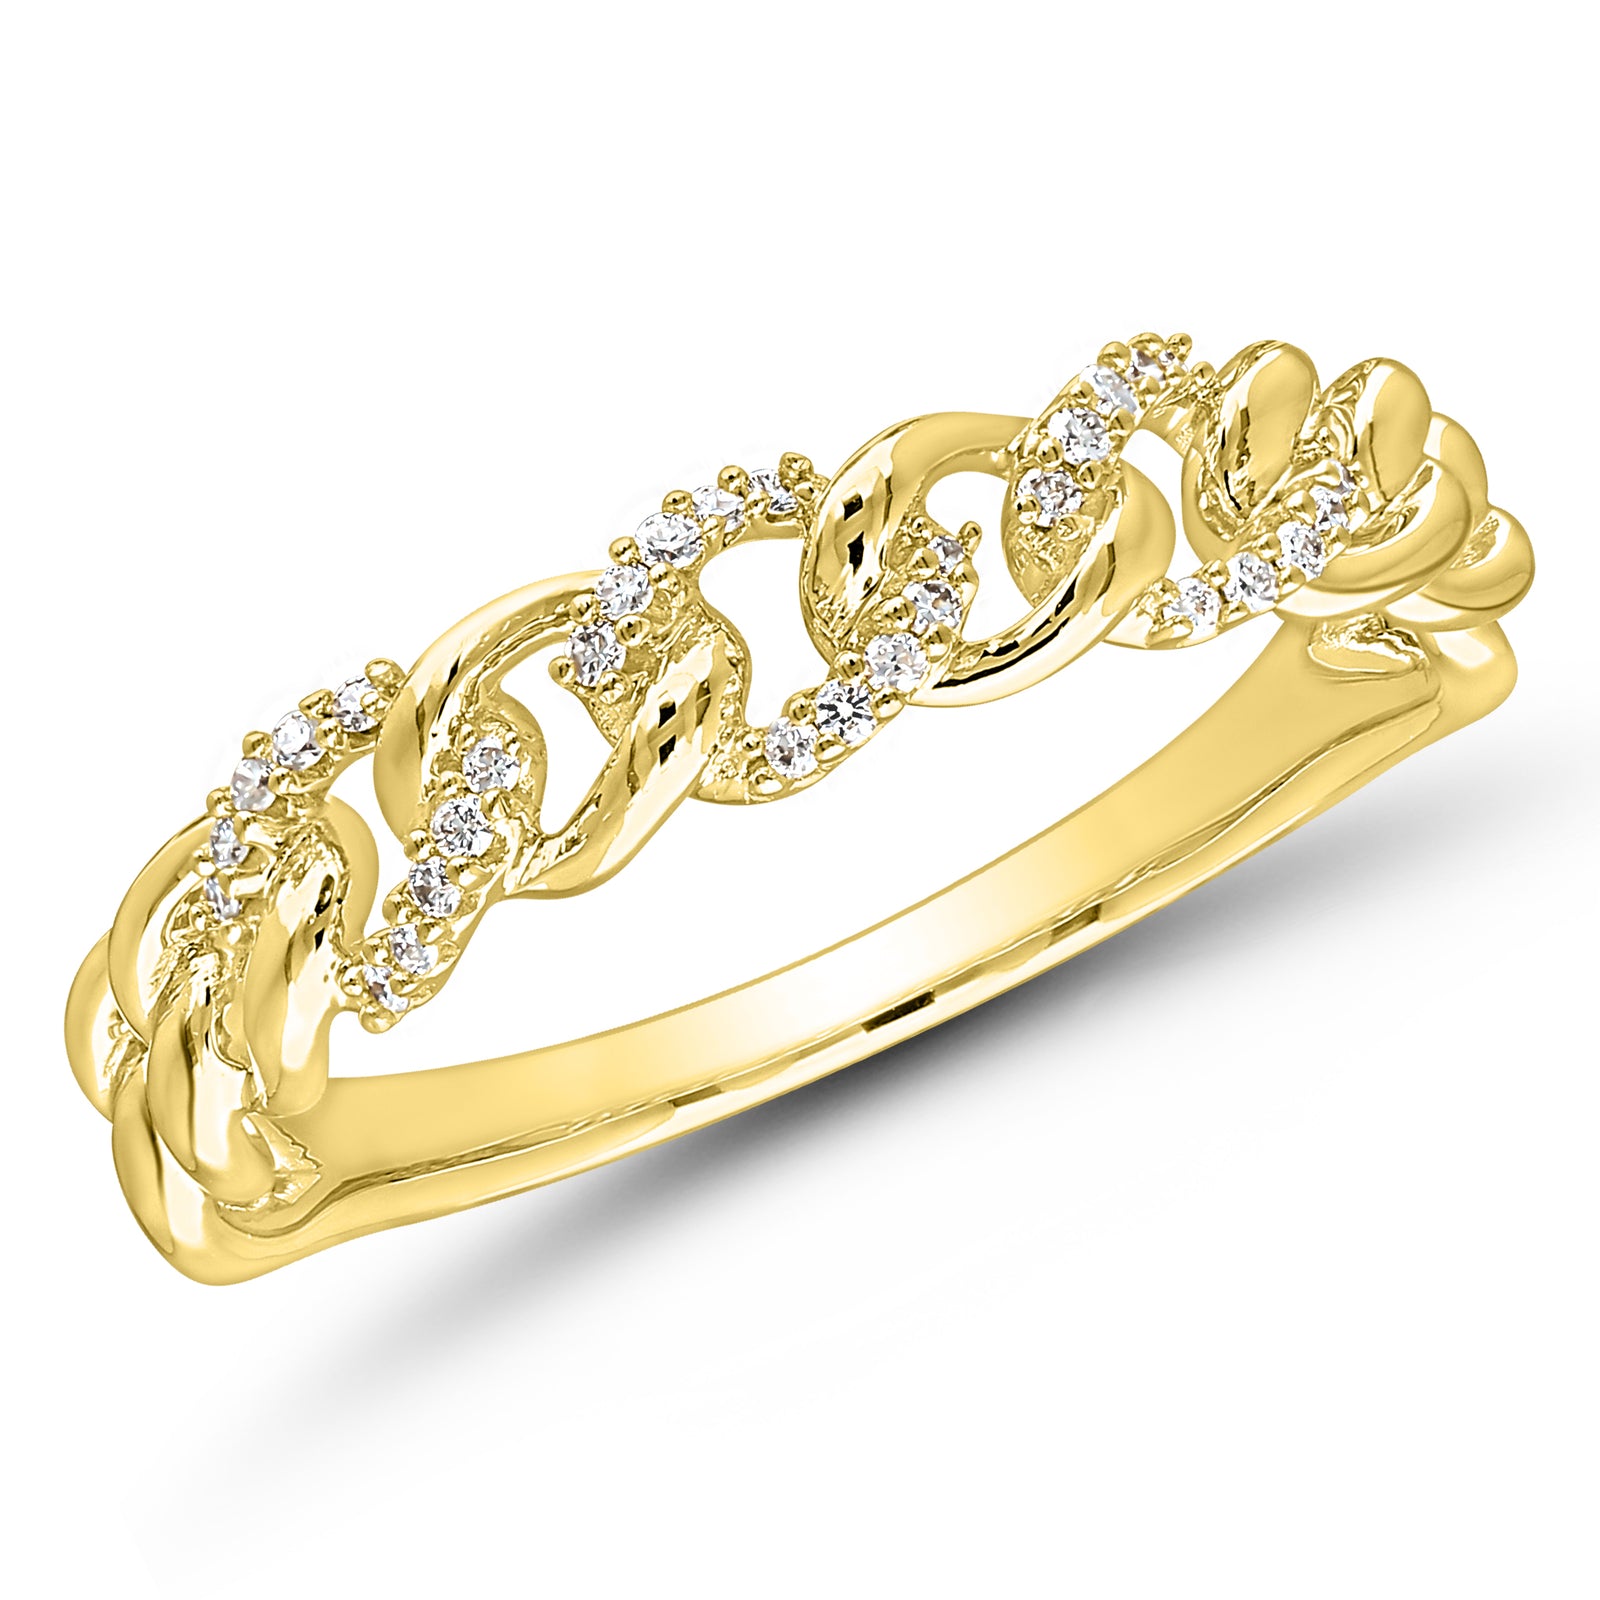 Chain Link Diamond Ring in 9 Carat Yellow Gold